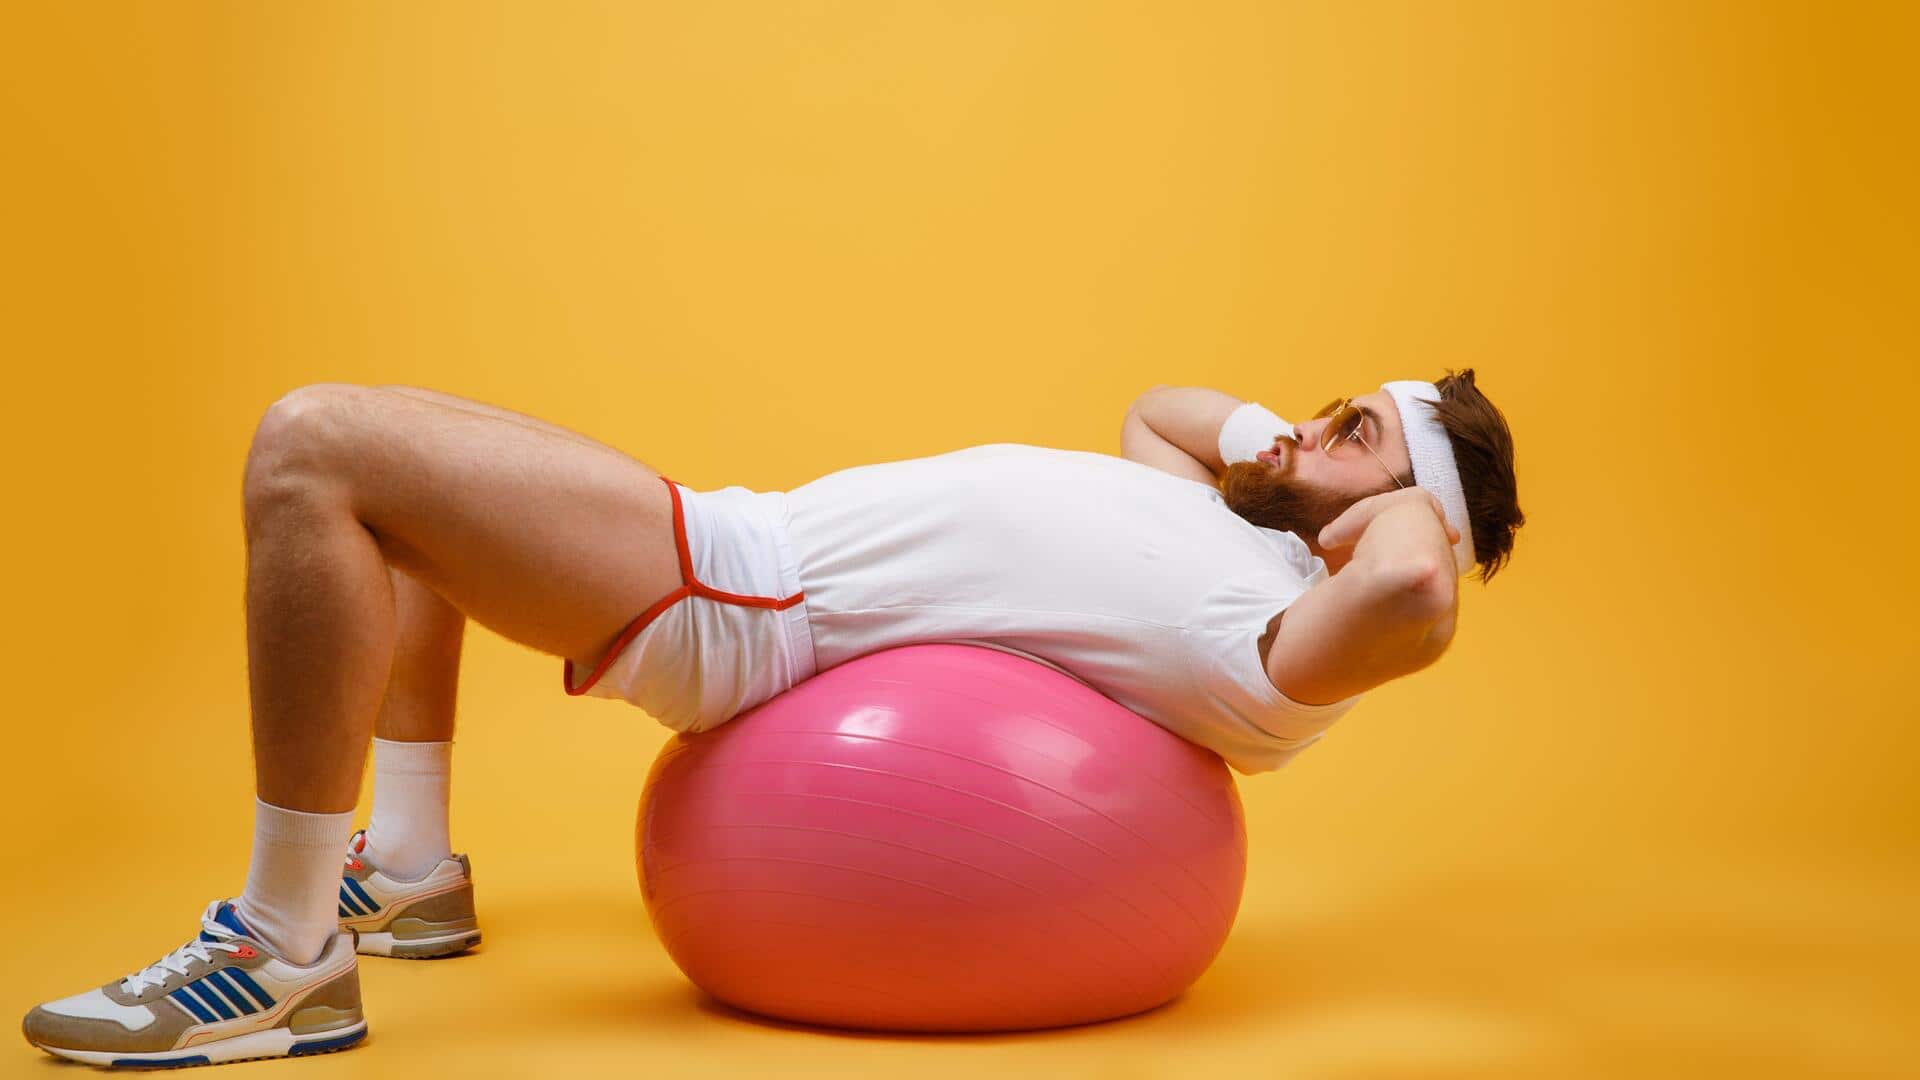 Easy exercises that you can do with a gym ball